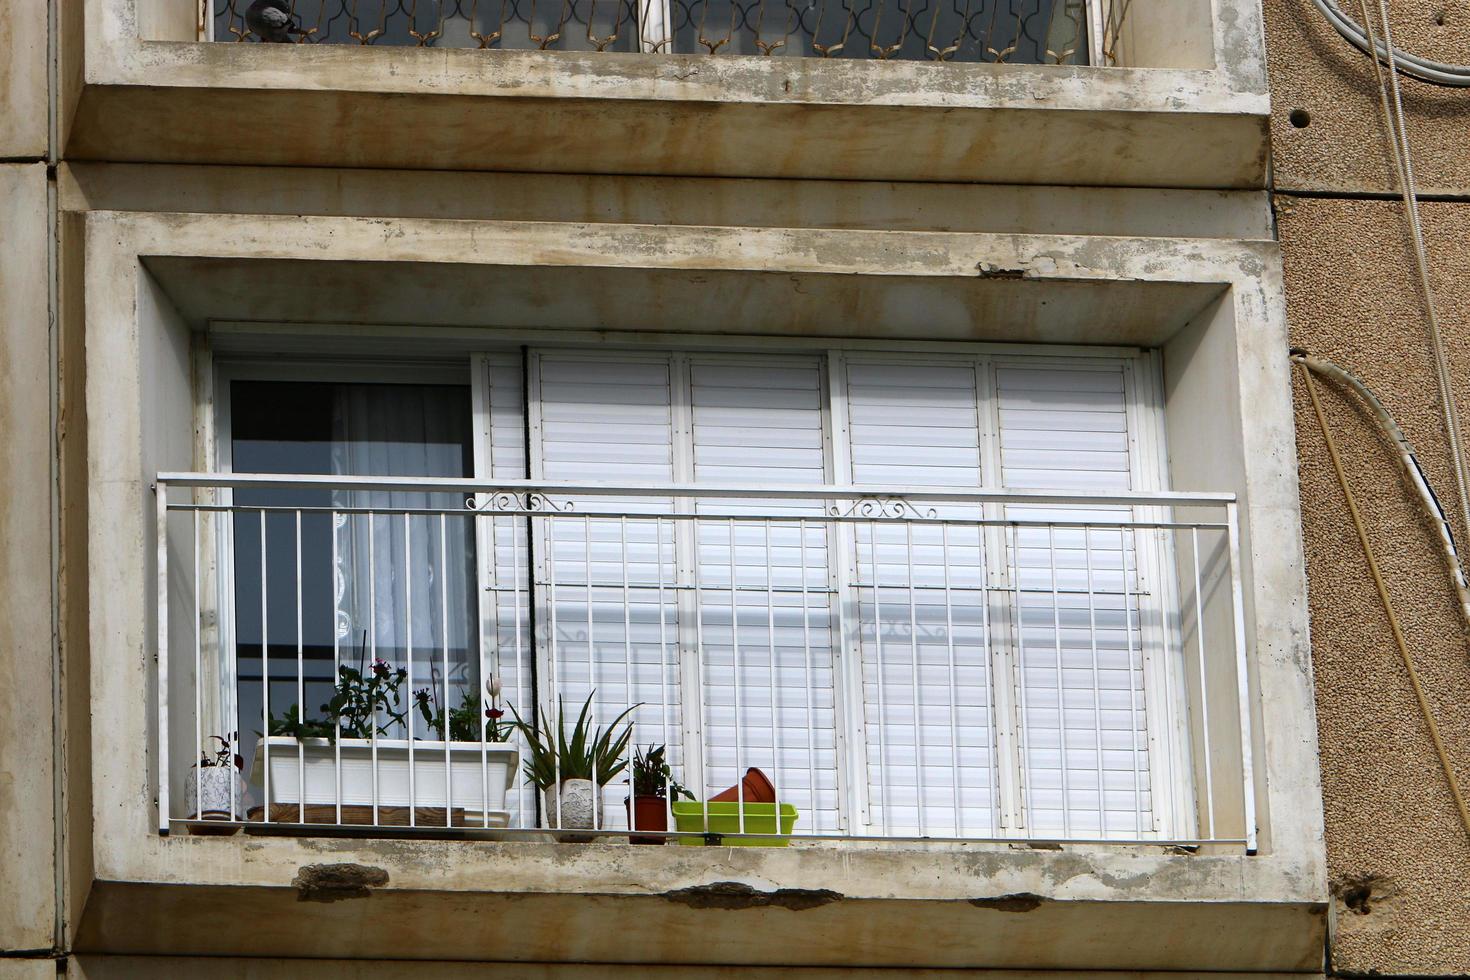 Haifa Israel June 15, 2020. Large balcony on the facade of a residential building. photo